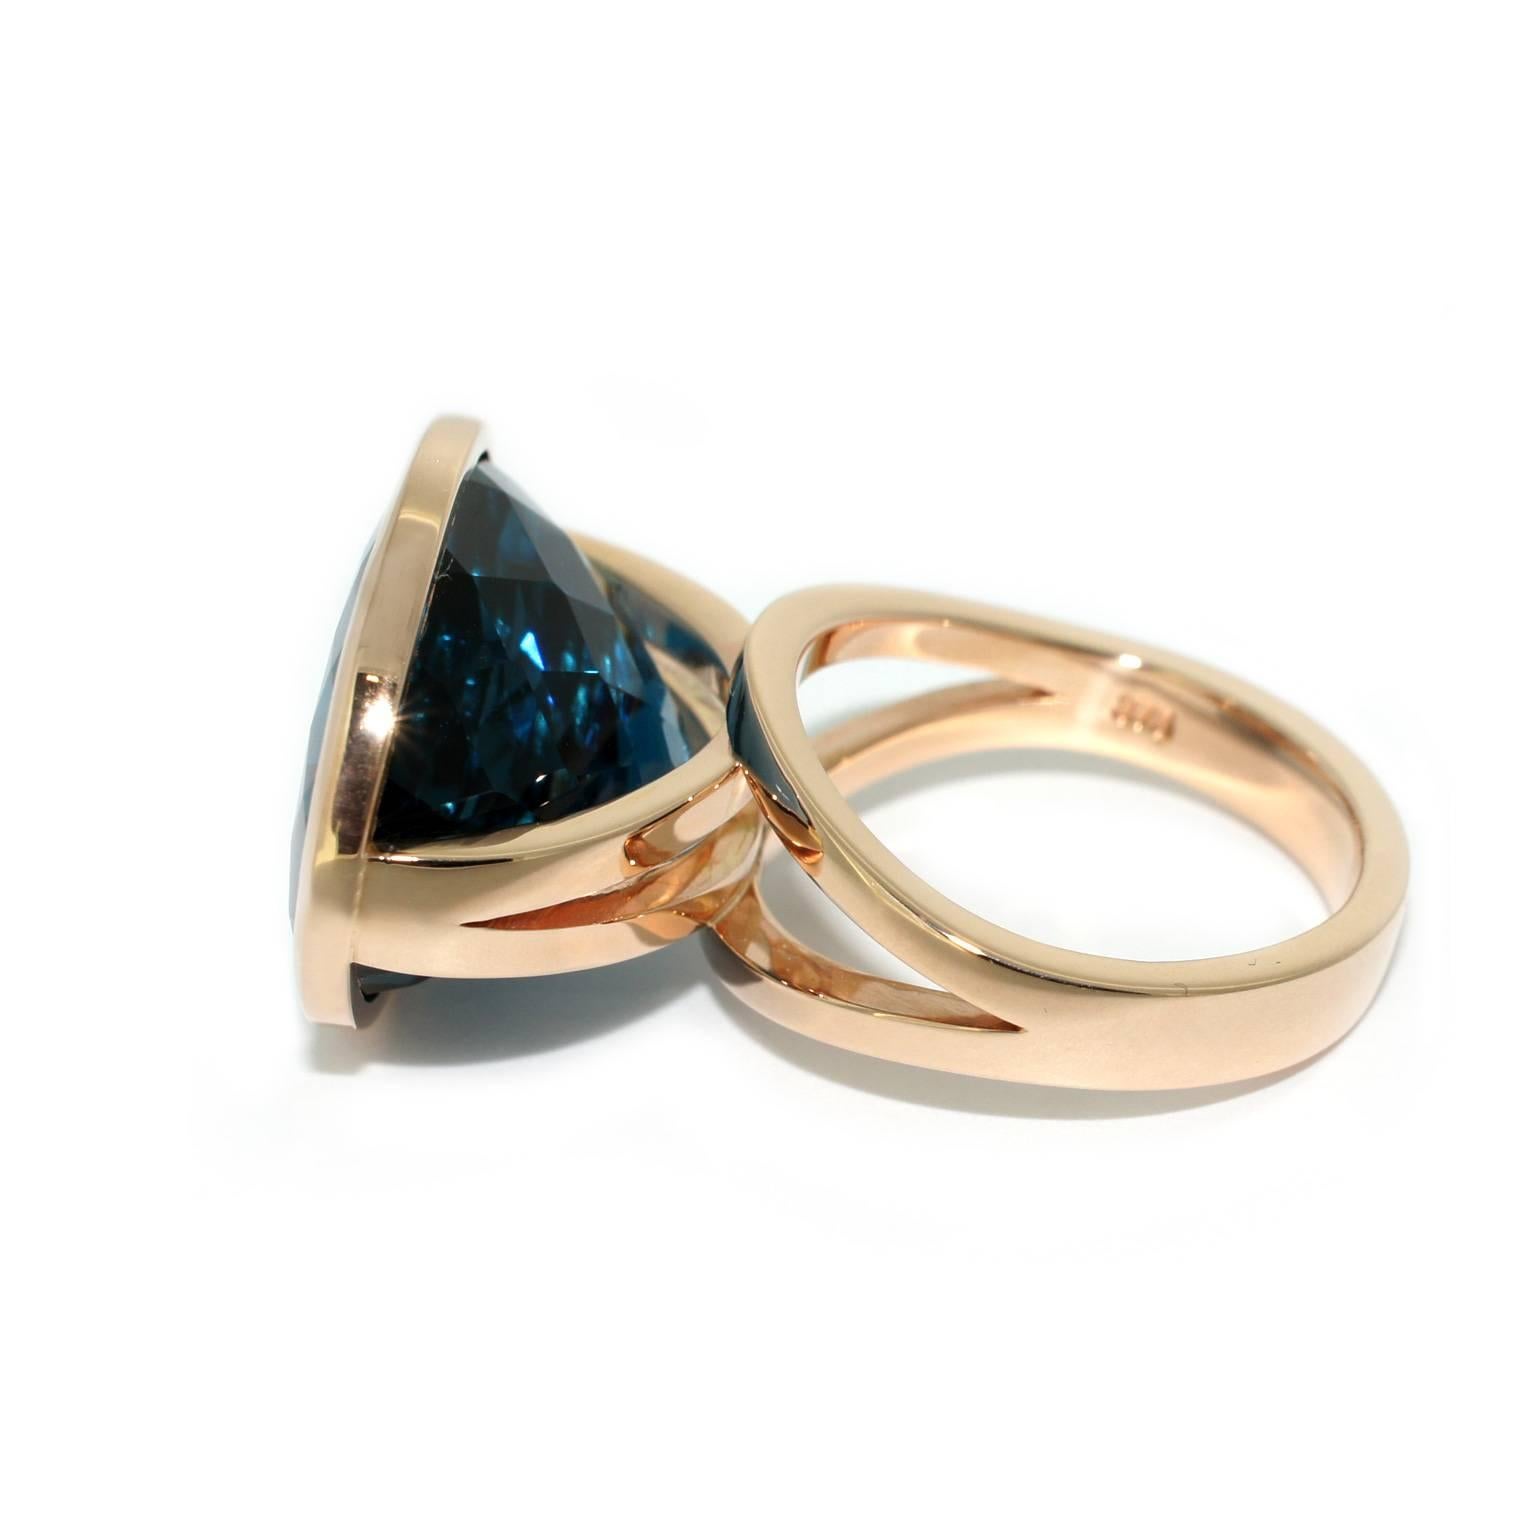 The clean, sculptural lines of this ring accentuate the beauty of the gemstone, letting light play on its facets. Handcrafted in Sydney in 9 karat rose gold, this ring is set with an approximately 20 carat London Blue topaz.

Size N (UK/Australian),